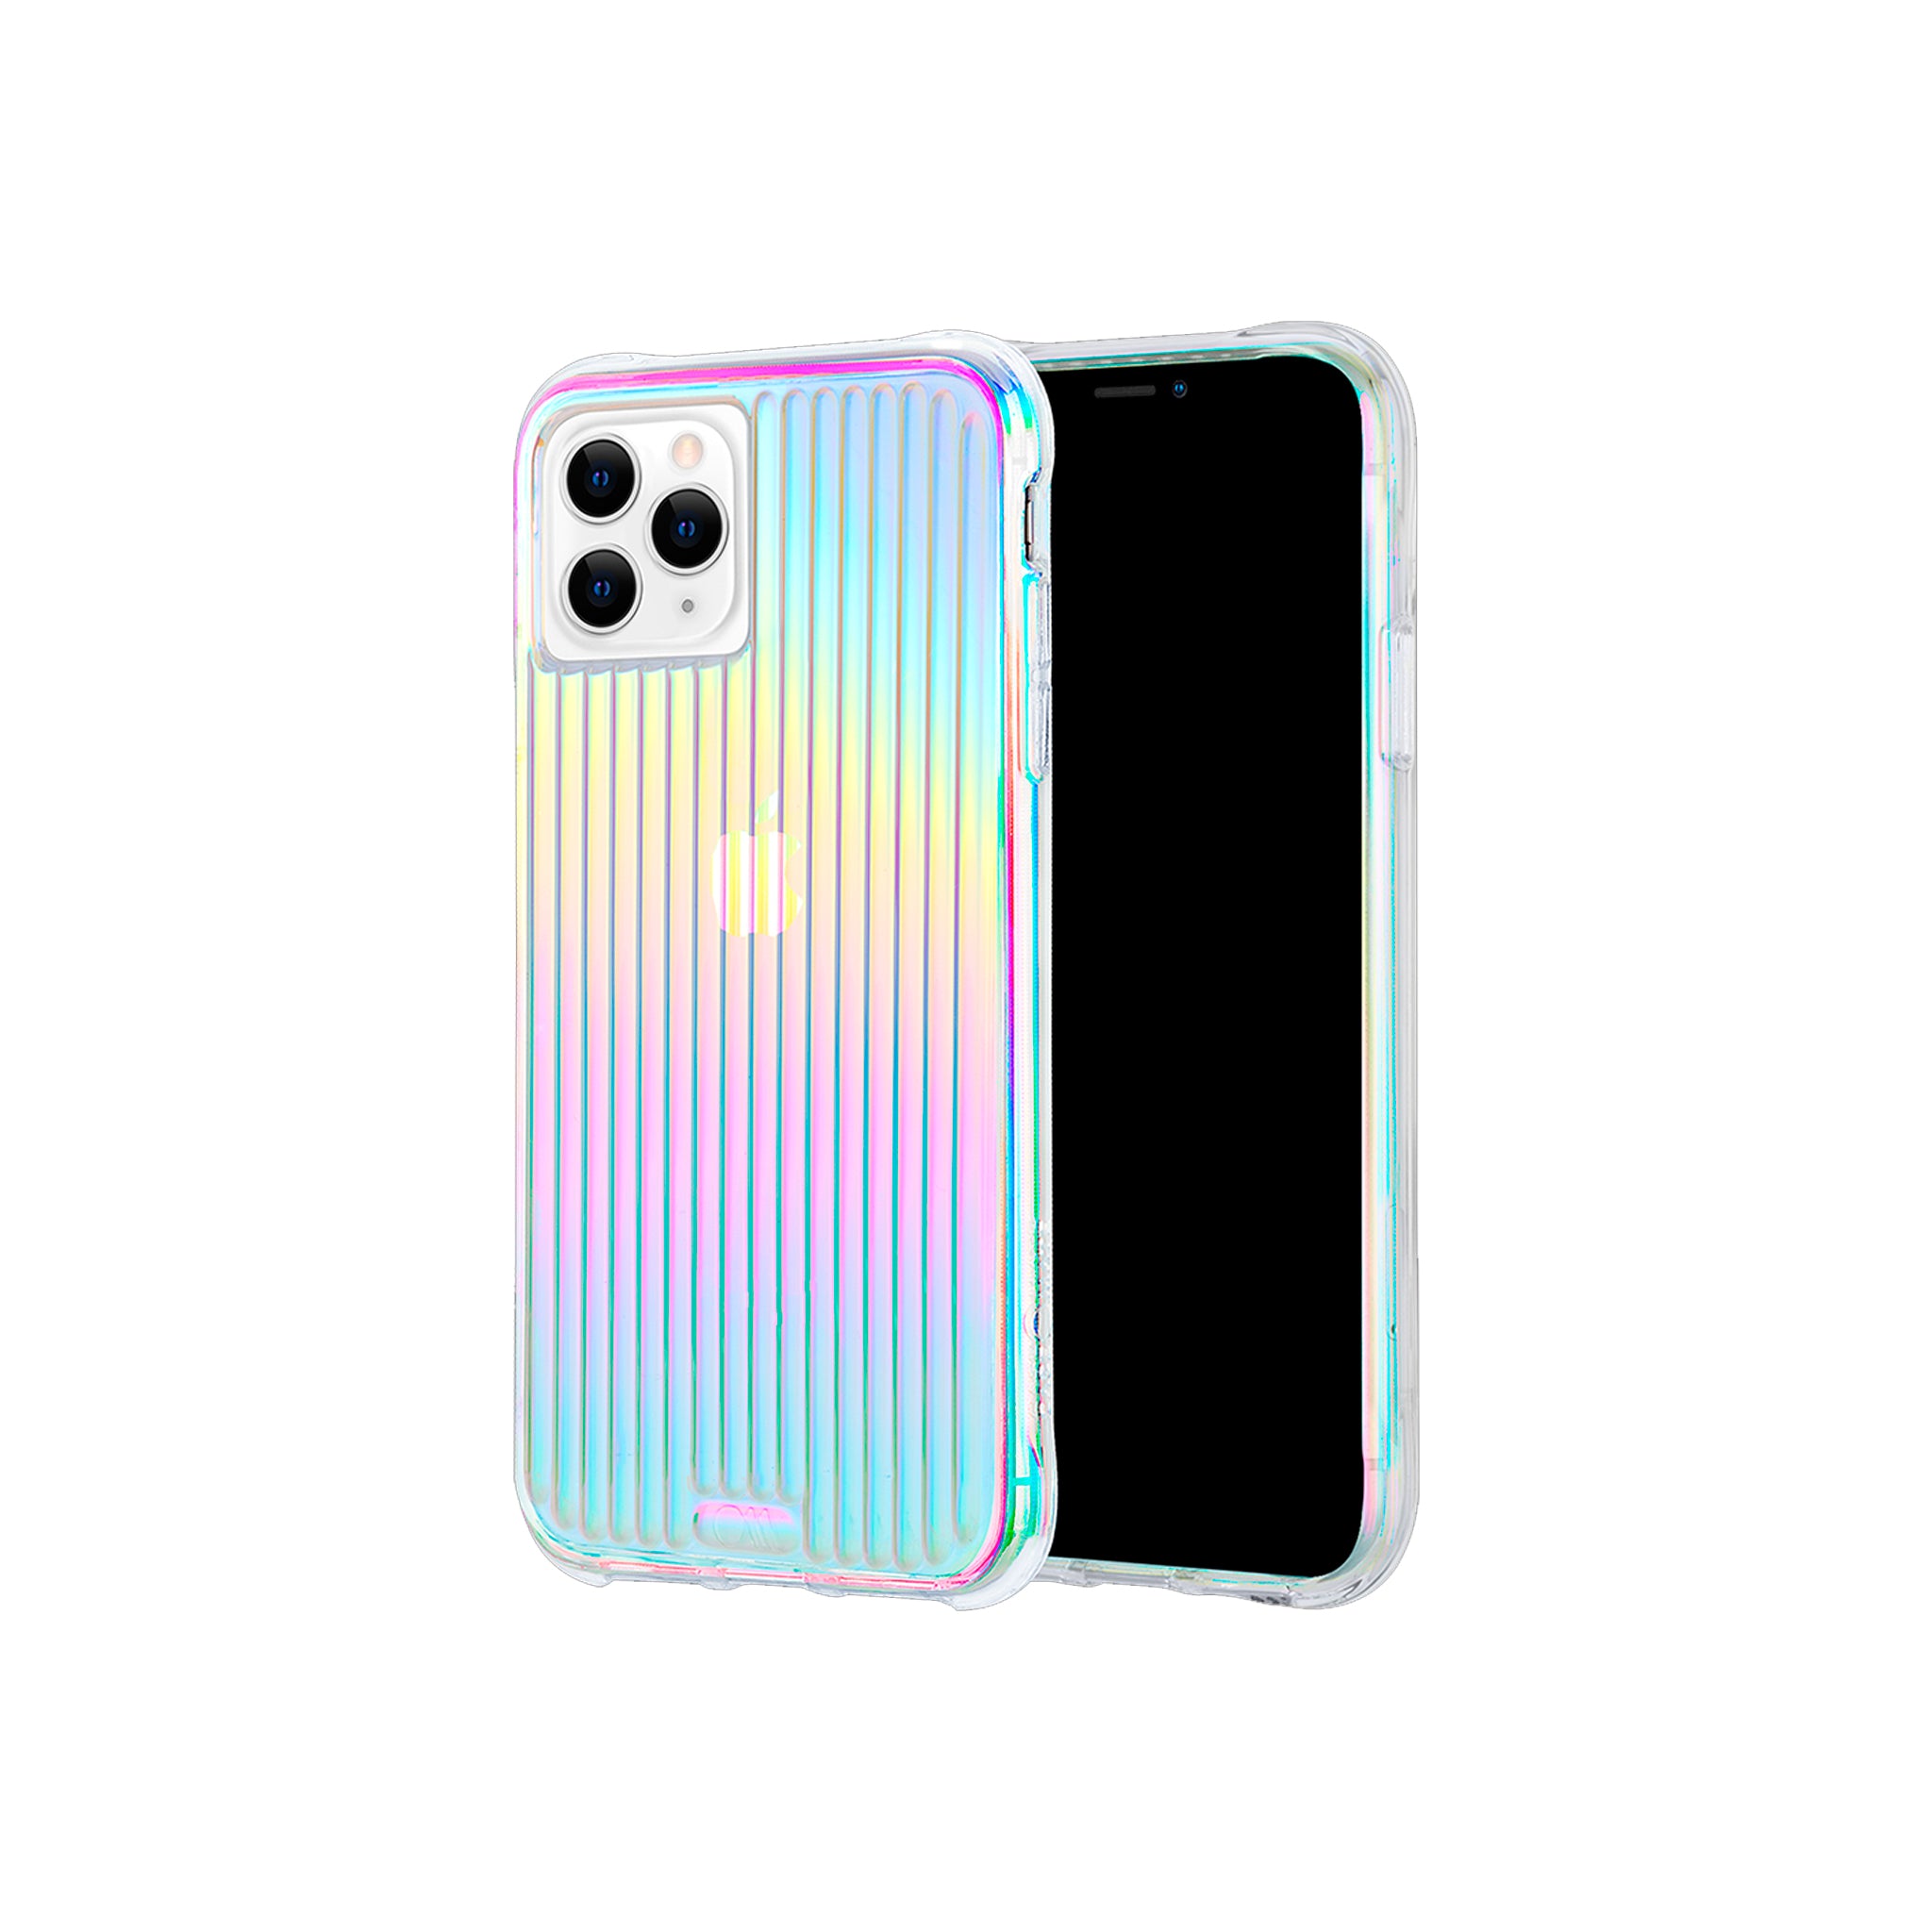 Case-mate - Tough Groove Case For Apple iPhone 11 Pro - Iridescent